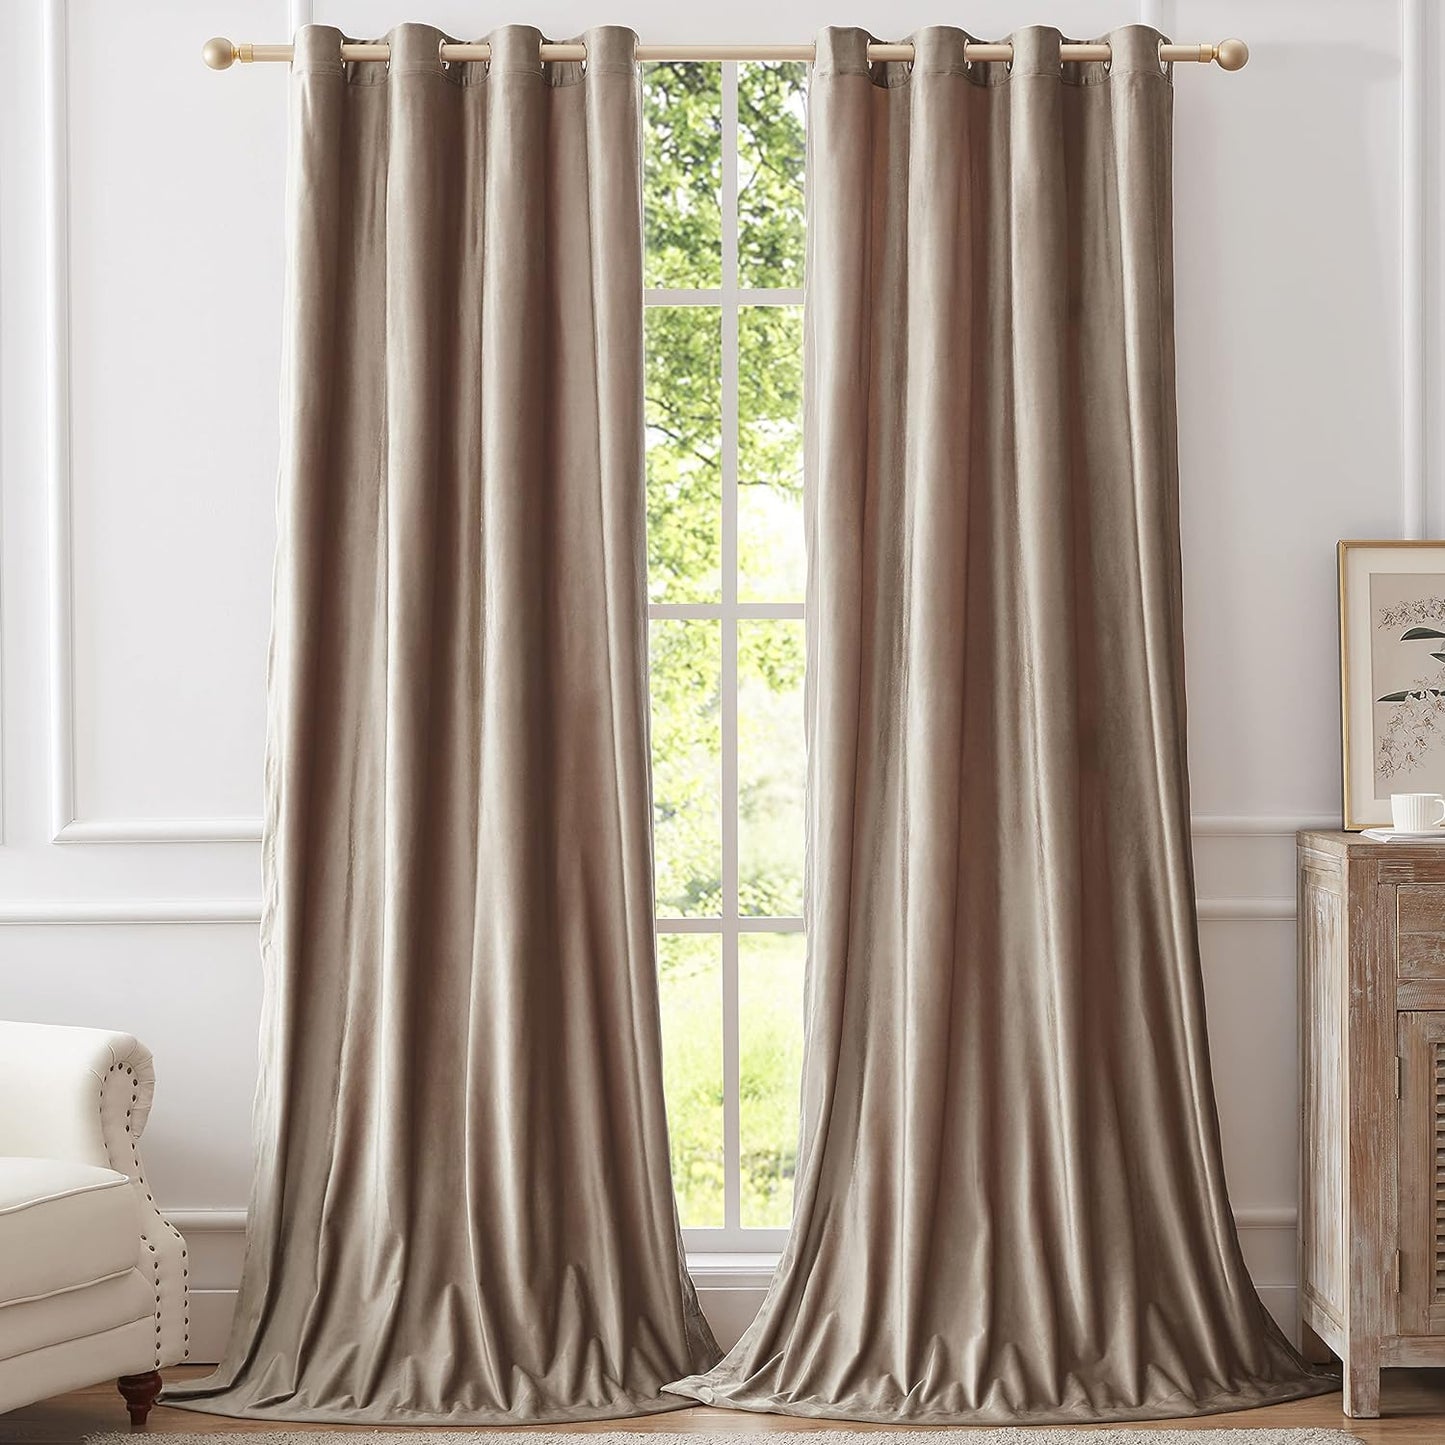 BULBUL Velvet Gold Curtains 84 Inch Length- Living Room Blackout Thermal Window Drapes Darkening Decor Grommet Curtains for Bedroom Set of 2 Panels  BULBUL Taupe 52"W X 90"L 